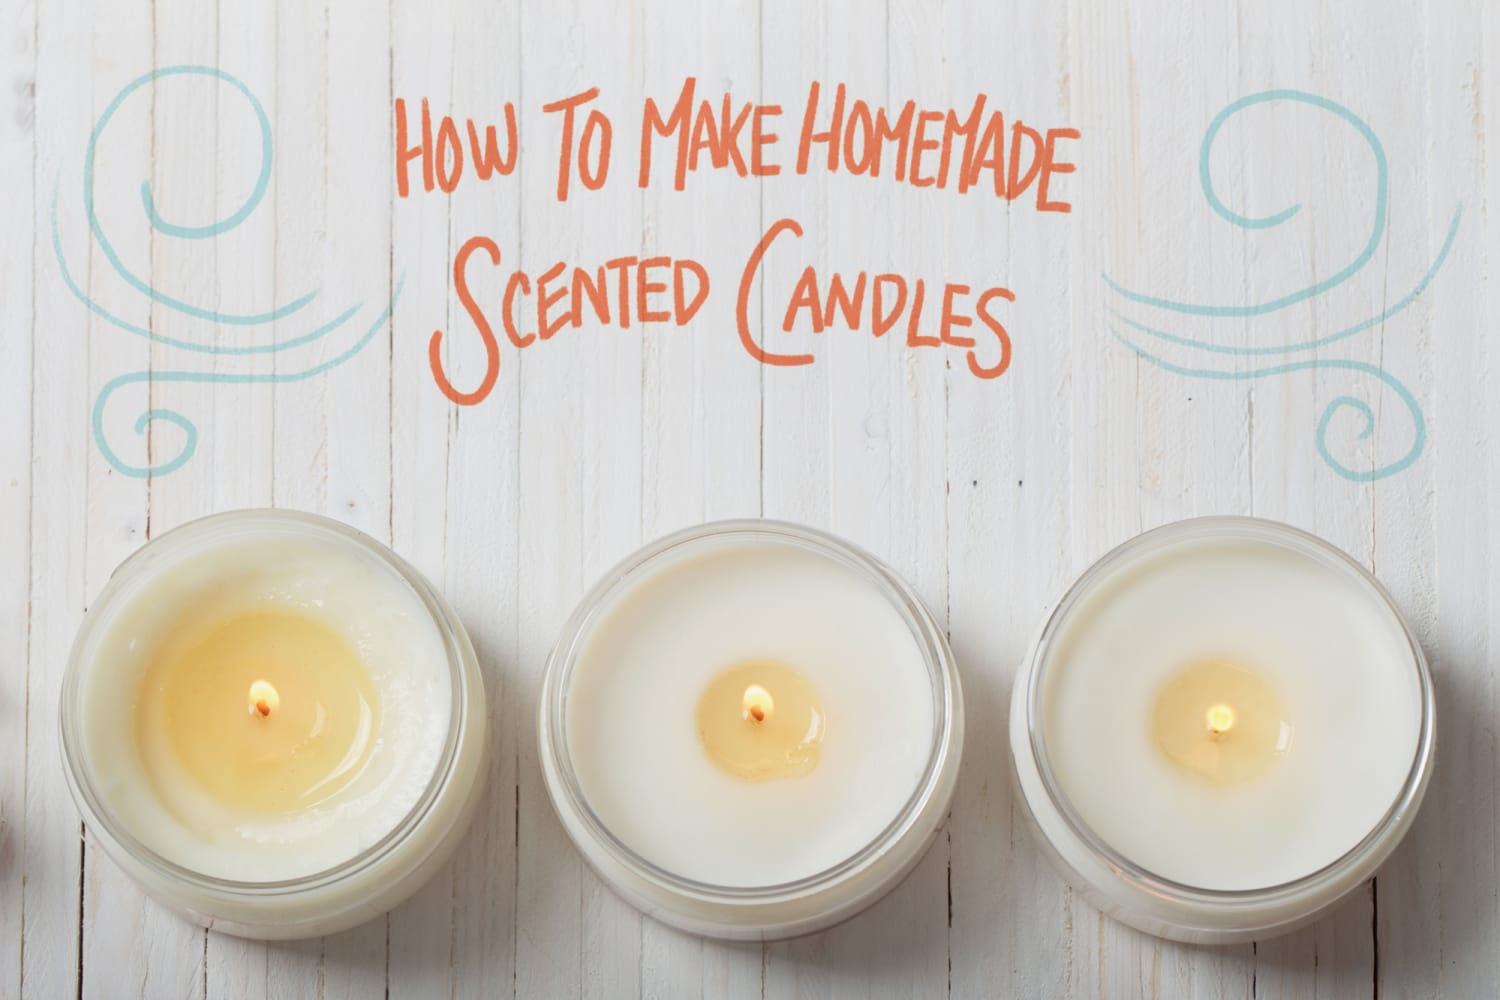 How to Make Homemade Scented Candles - Instructions